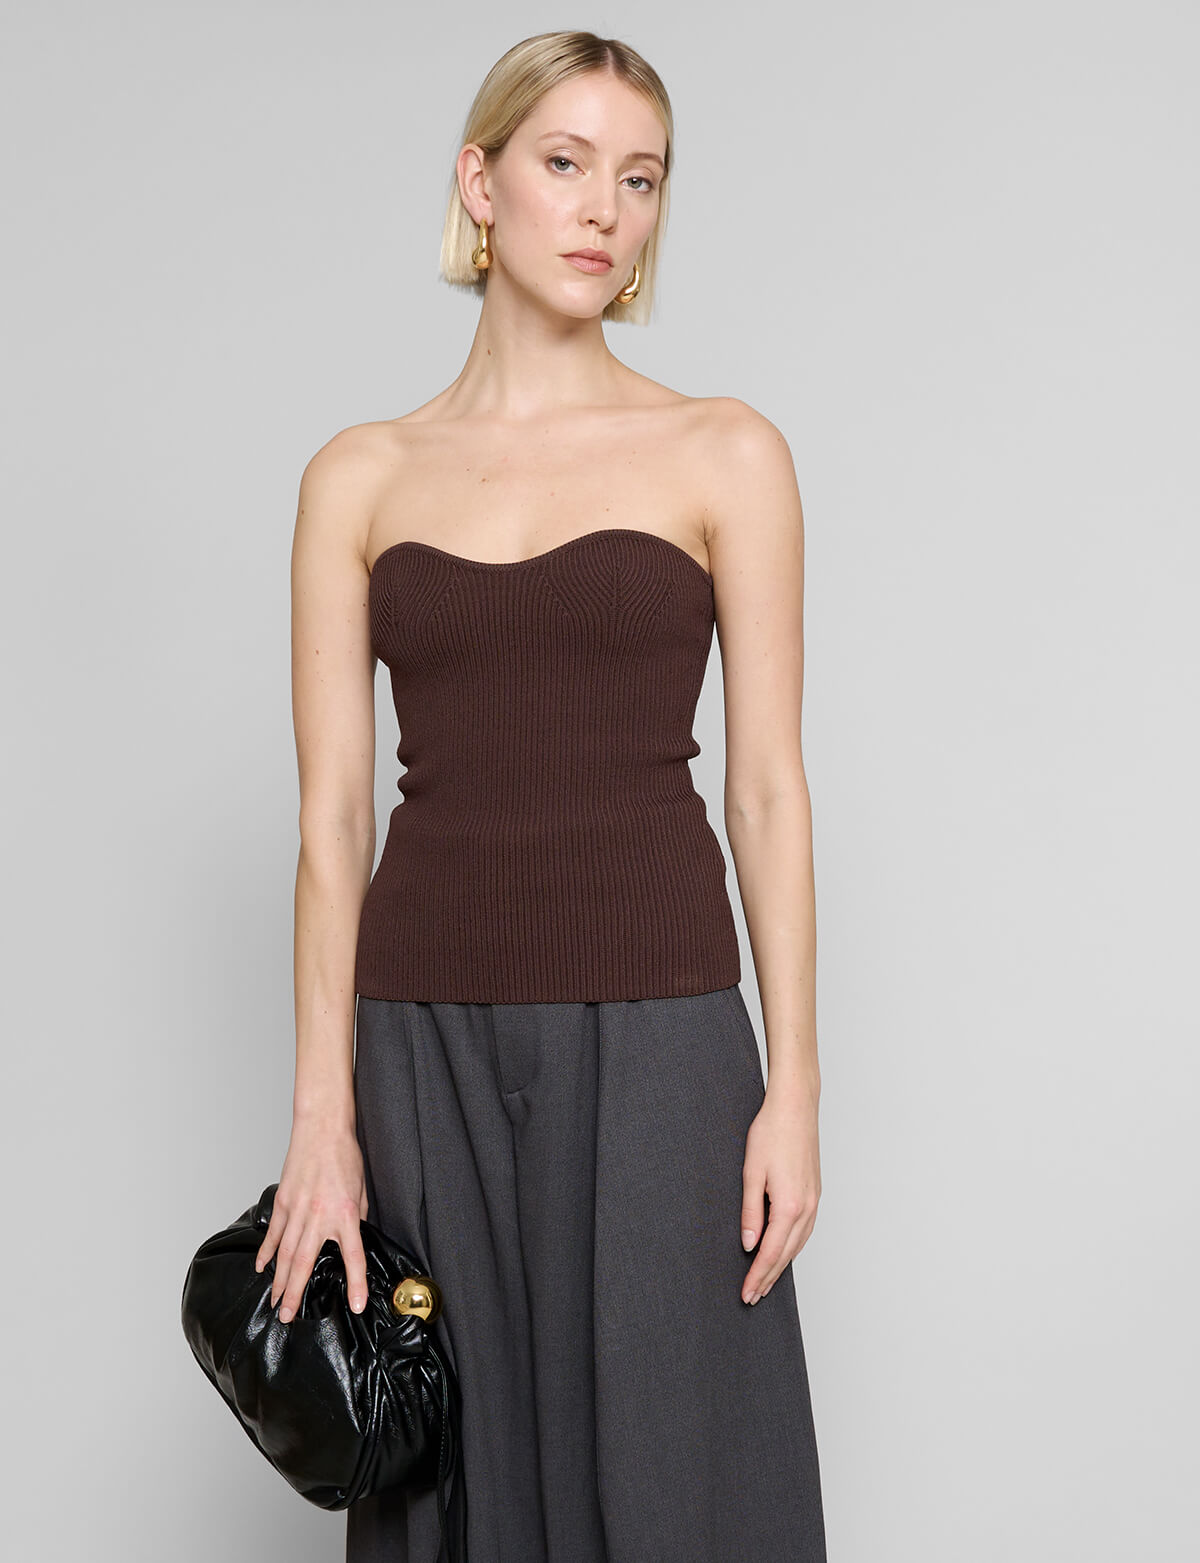 Two-Piece Knit Top with Shrug in Pebble -BESTSELLER